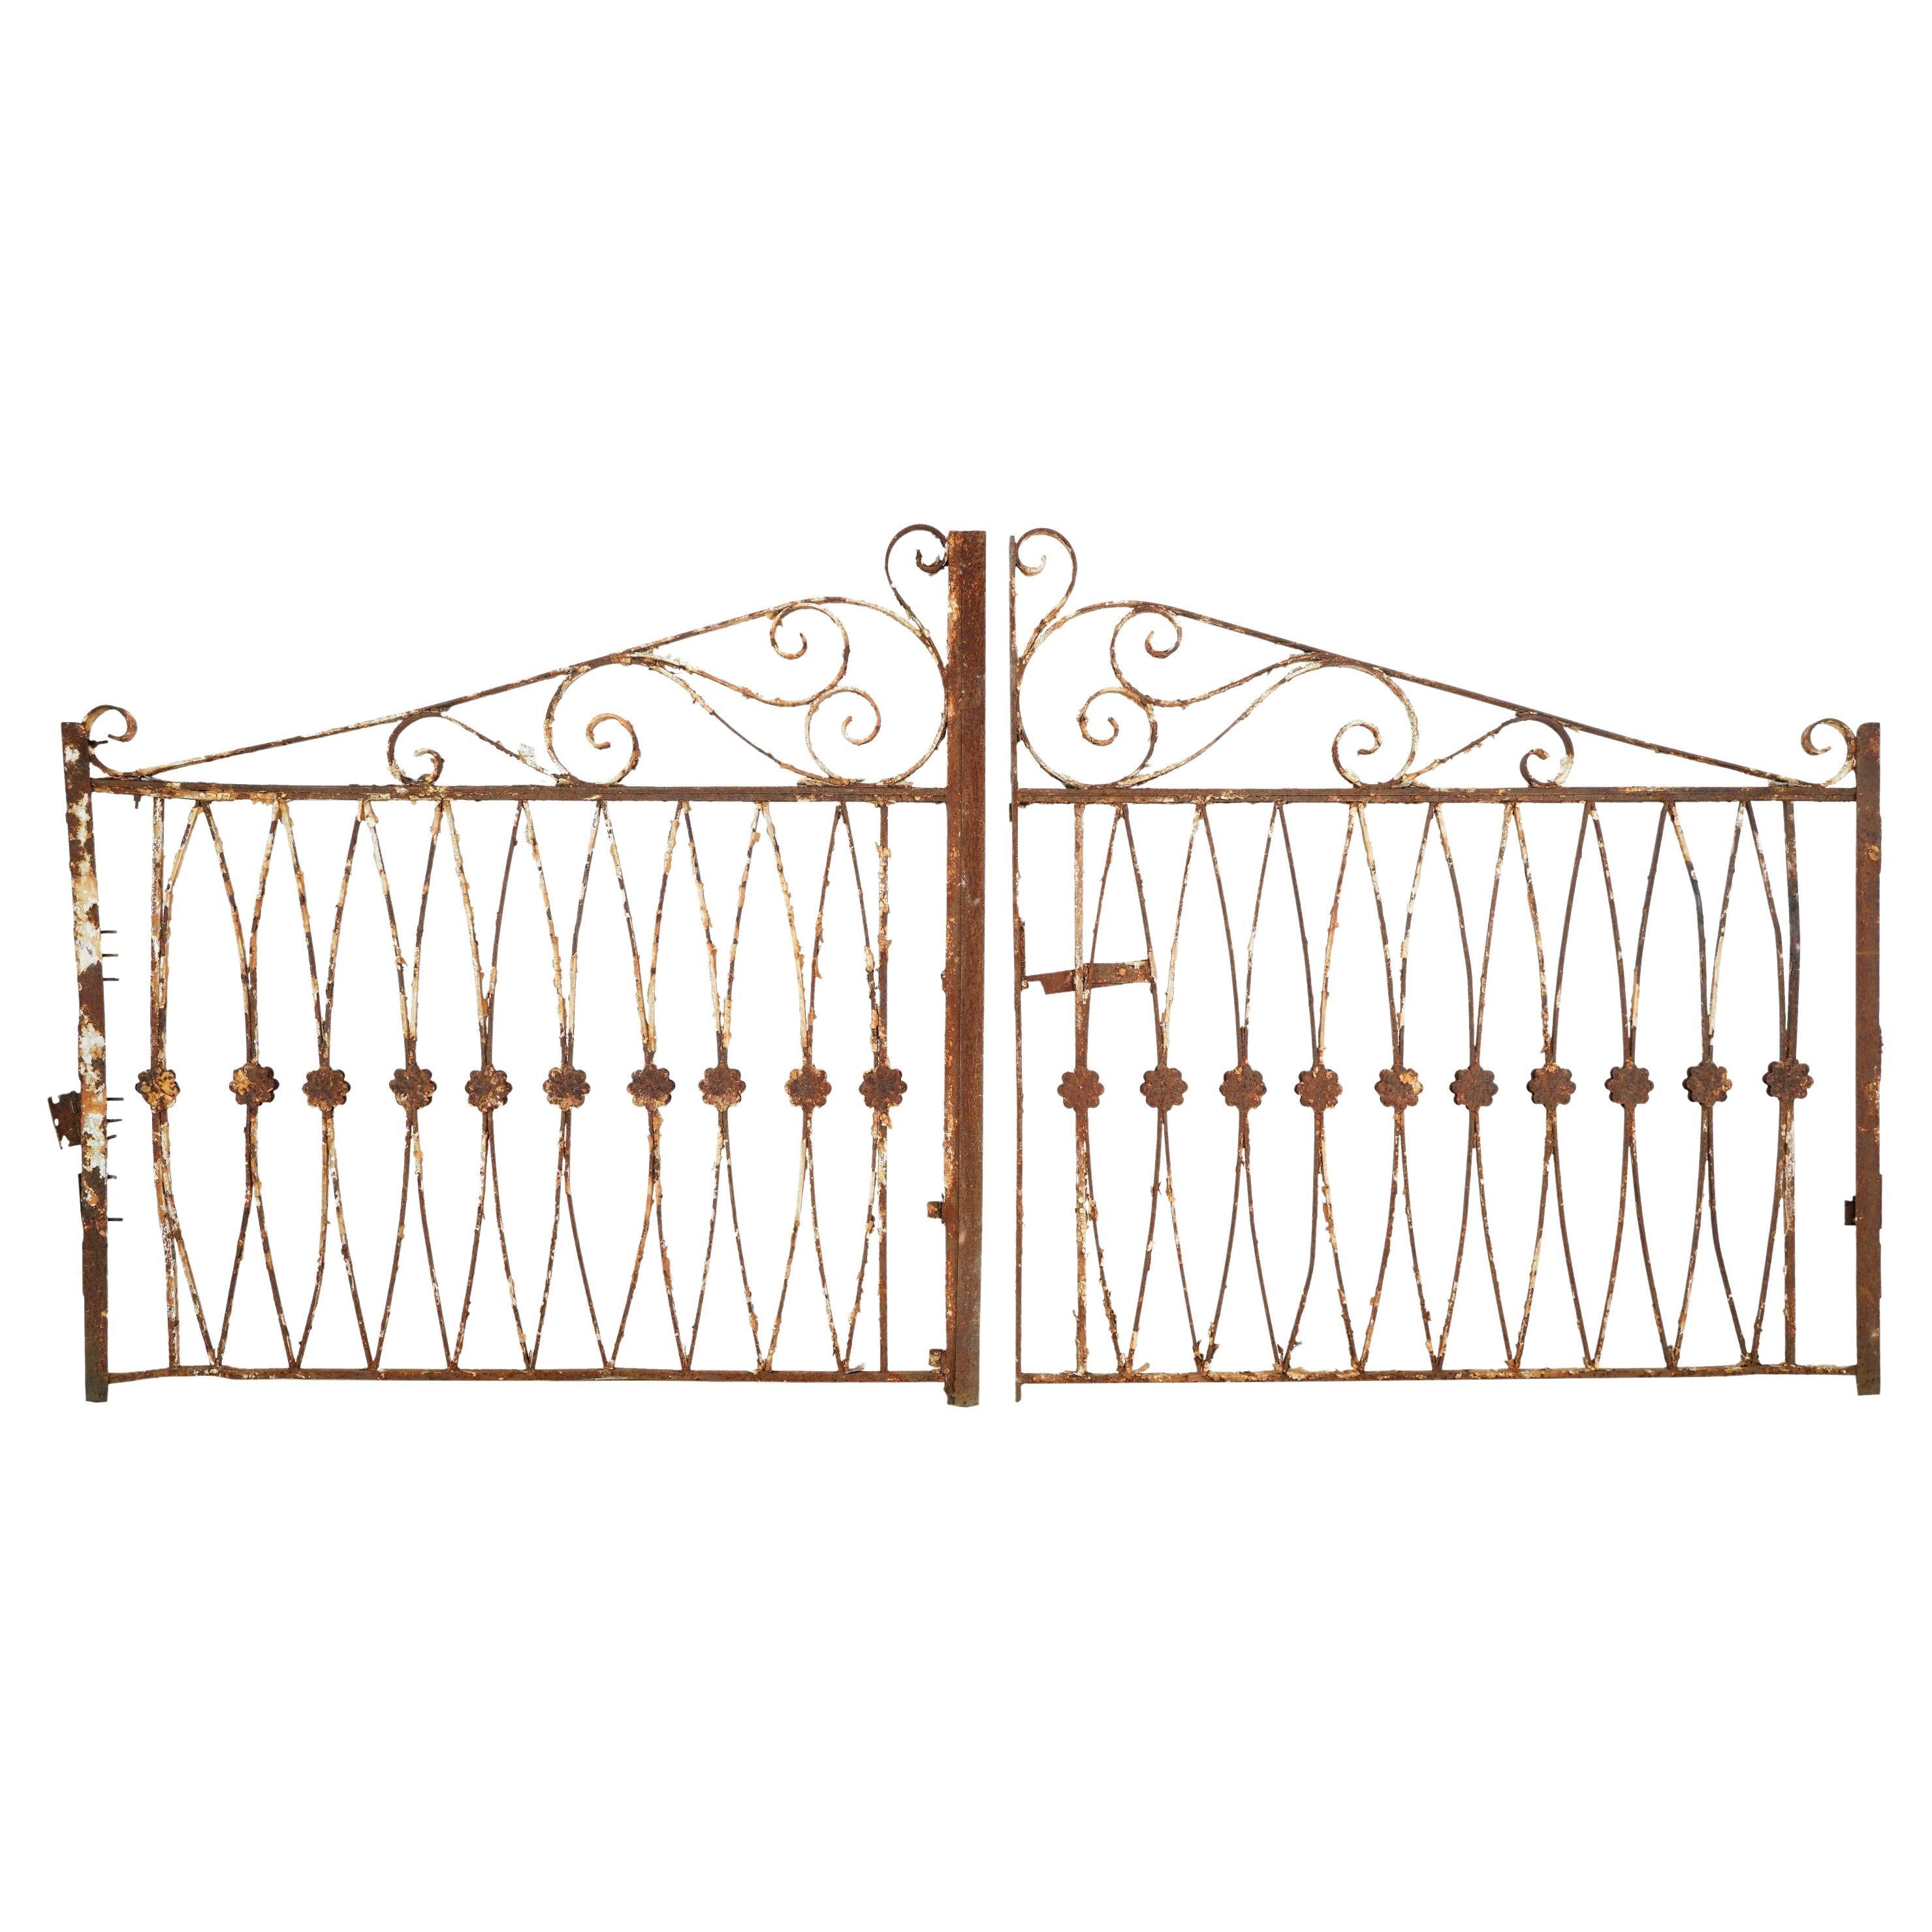 111 in. Ovals & Swirls Wrought Iron Double Driveway Gates